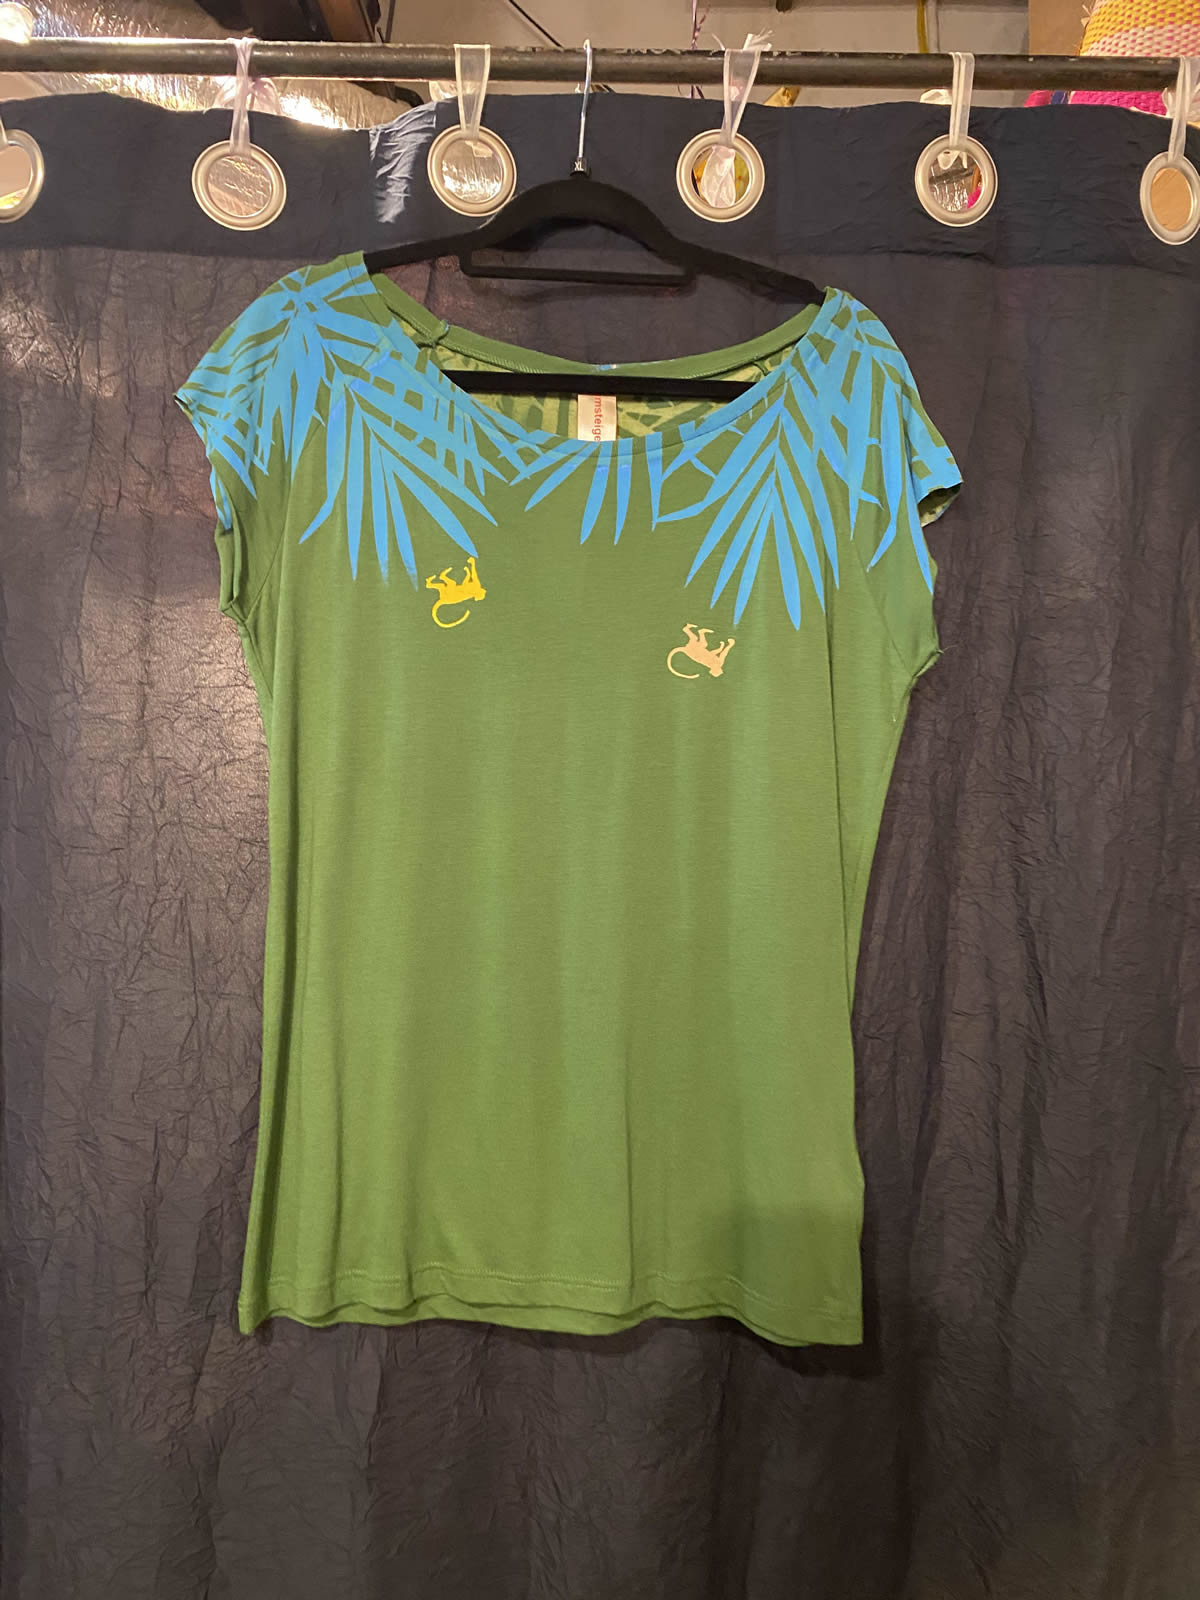 Umsteigen T-Shirt Green With Yellow Monkeys - From the Gecko Boutique